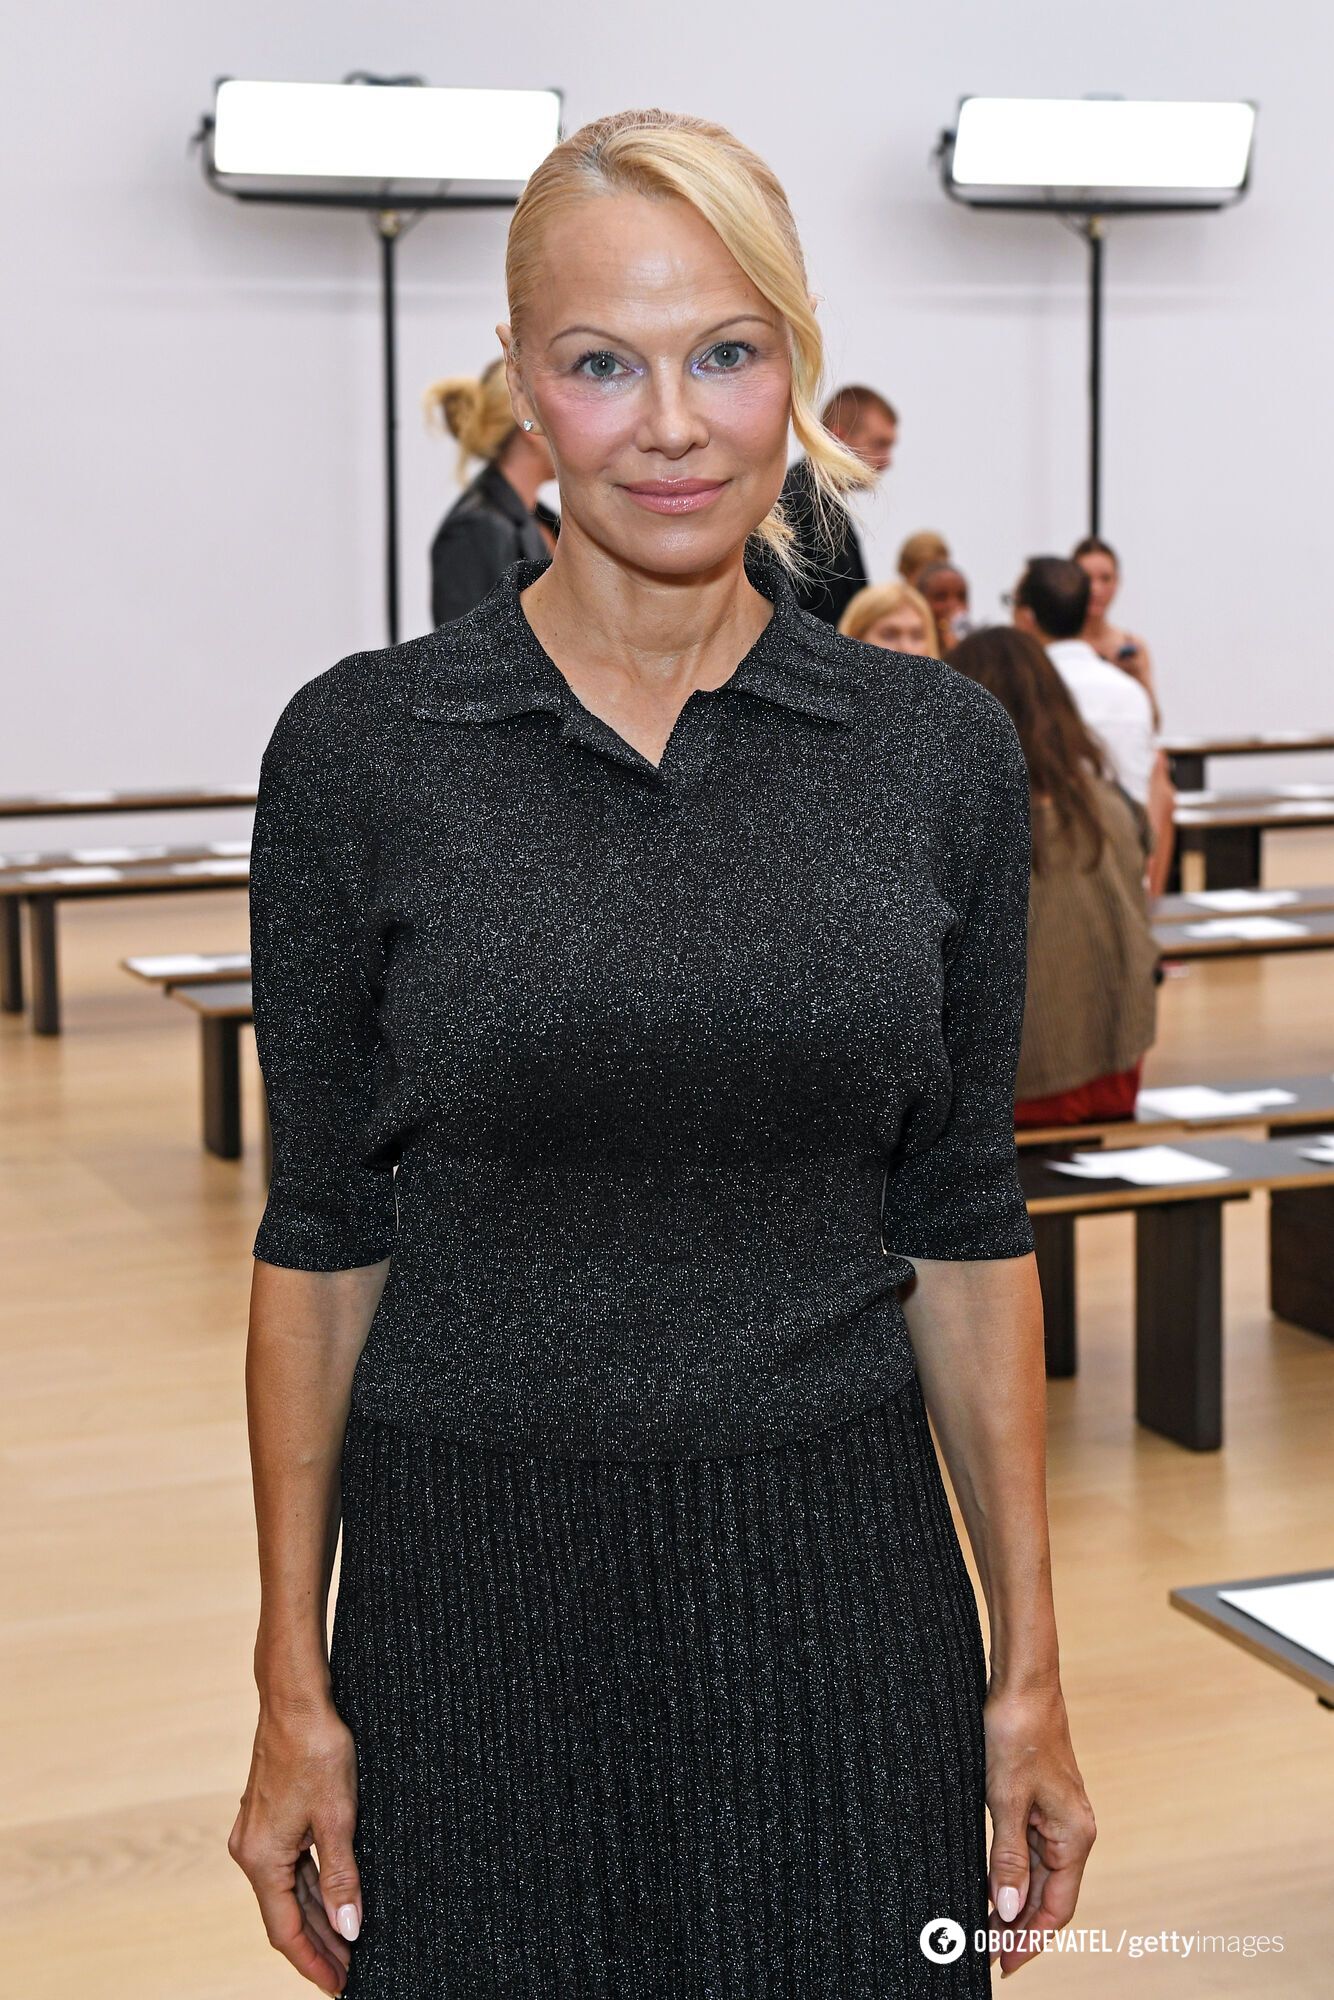 56-year-old Pamela Anderson attended Paris Fashion Week without makeup, surprising the audience. Photo